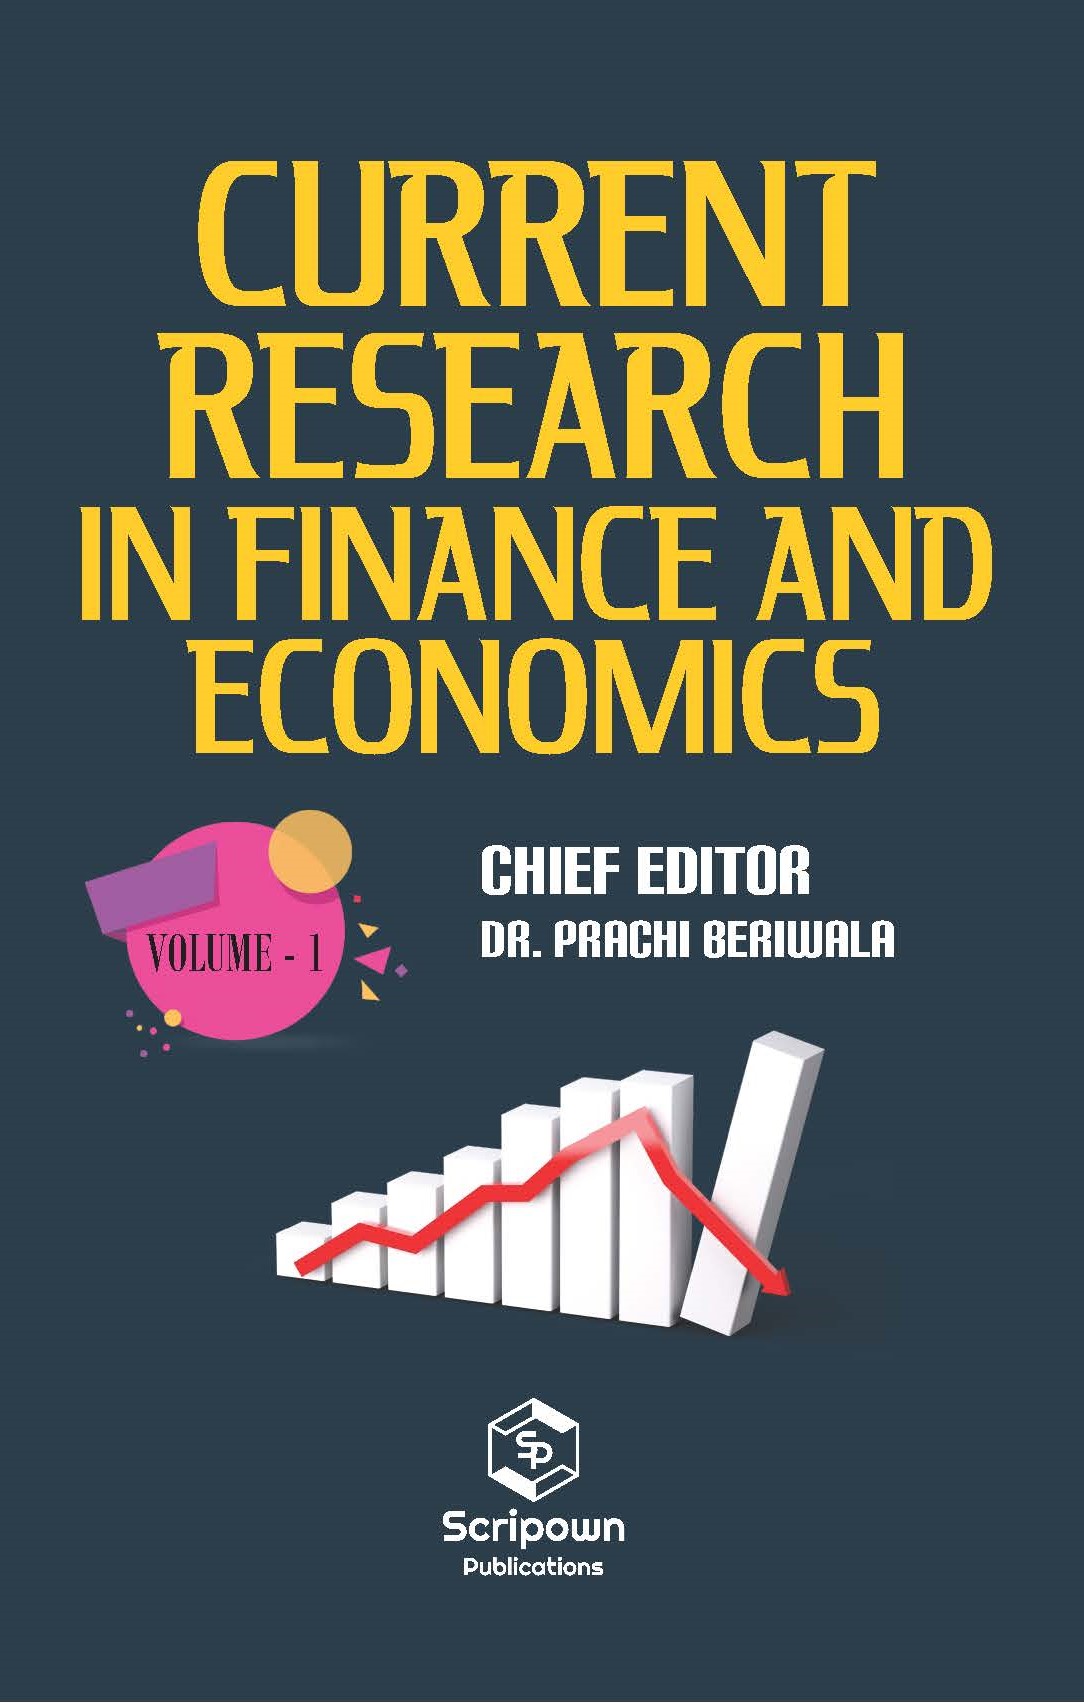 Current Research in Finance and Economics (Volume - 1)